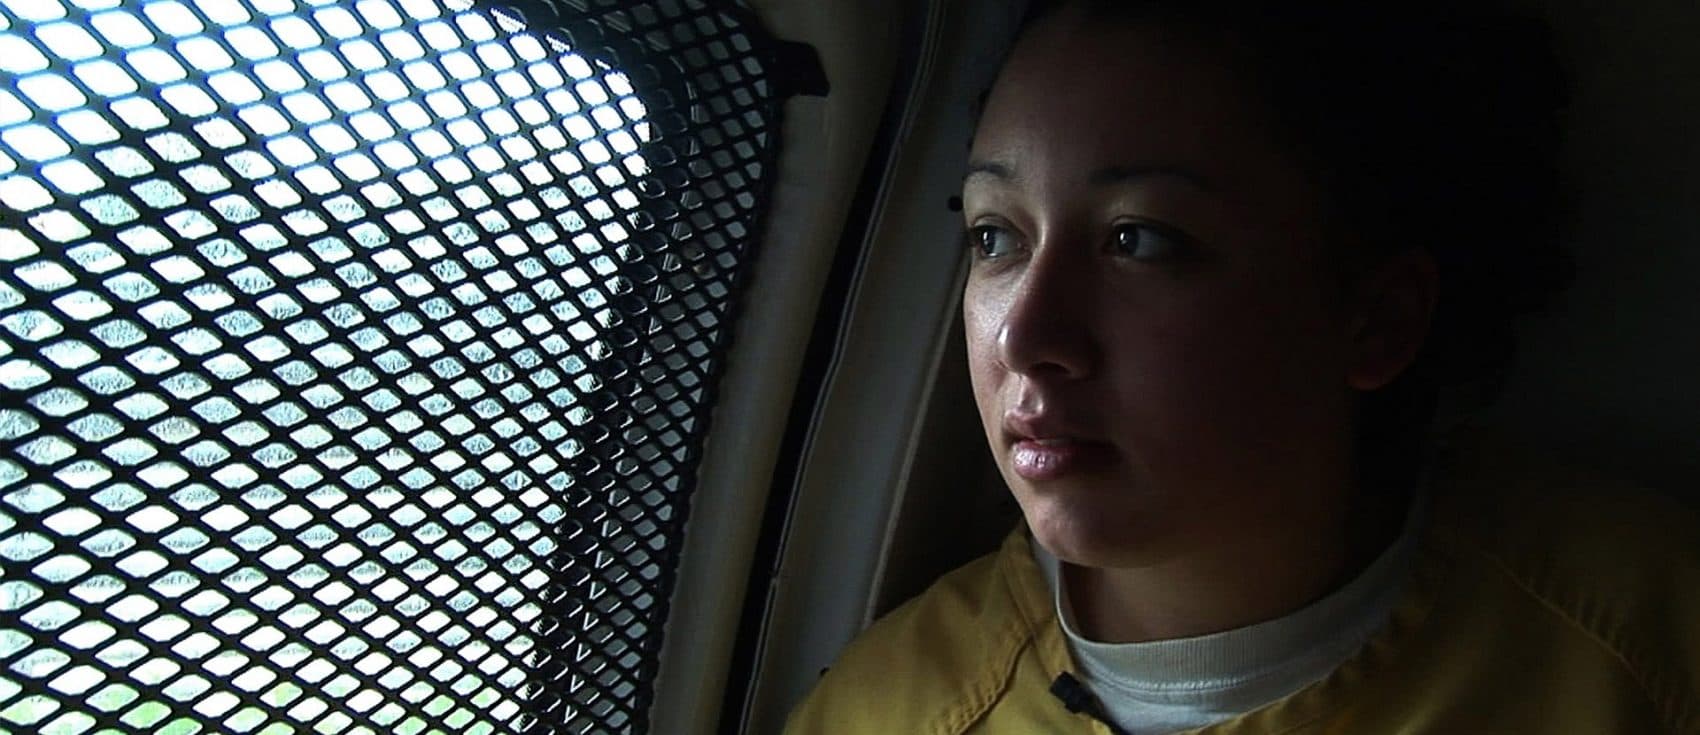 Cyntoia Brown, in a still from the 2011 documentary "Me Facing Life: The Cyntoia Brown Story." (Courtesy Daniel H. Birman Productions)